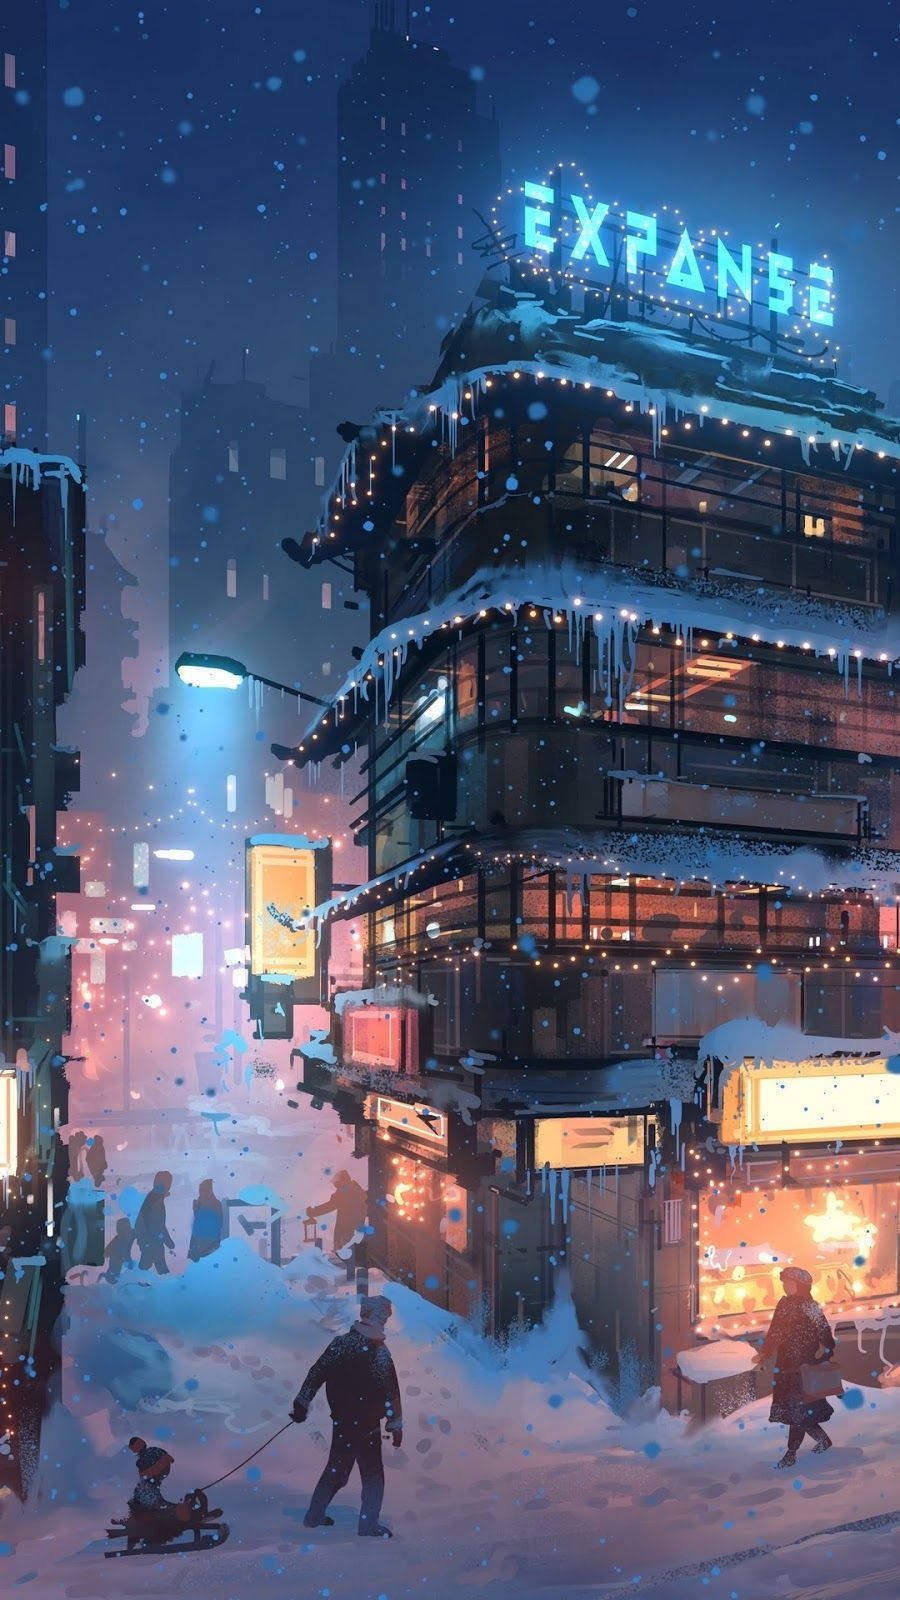 Aesthetic Anime Expanse Building In Winter Phone Background